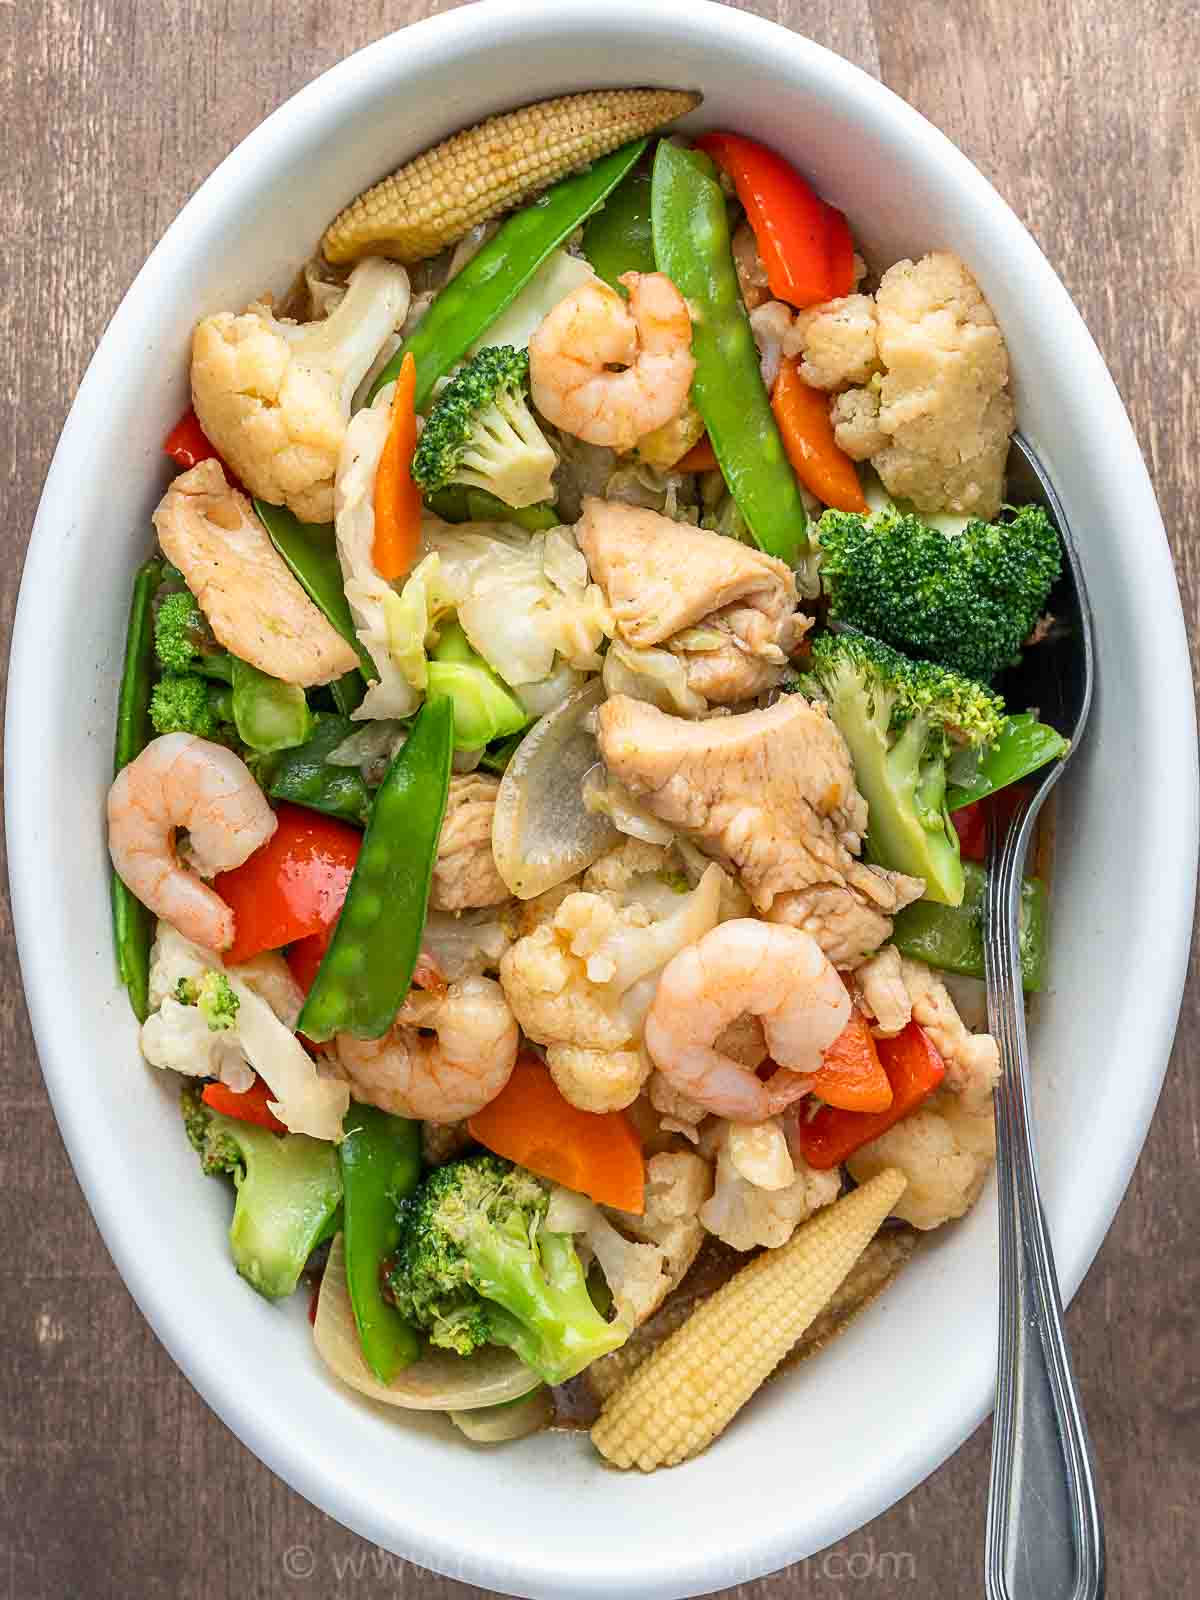 stir-fried vegetables with shrimp and chicken made with cabbage, baby corn, broccoli and cauliflower.